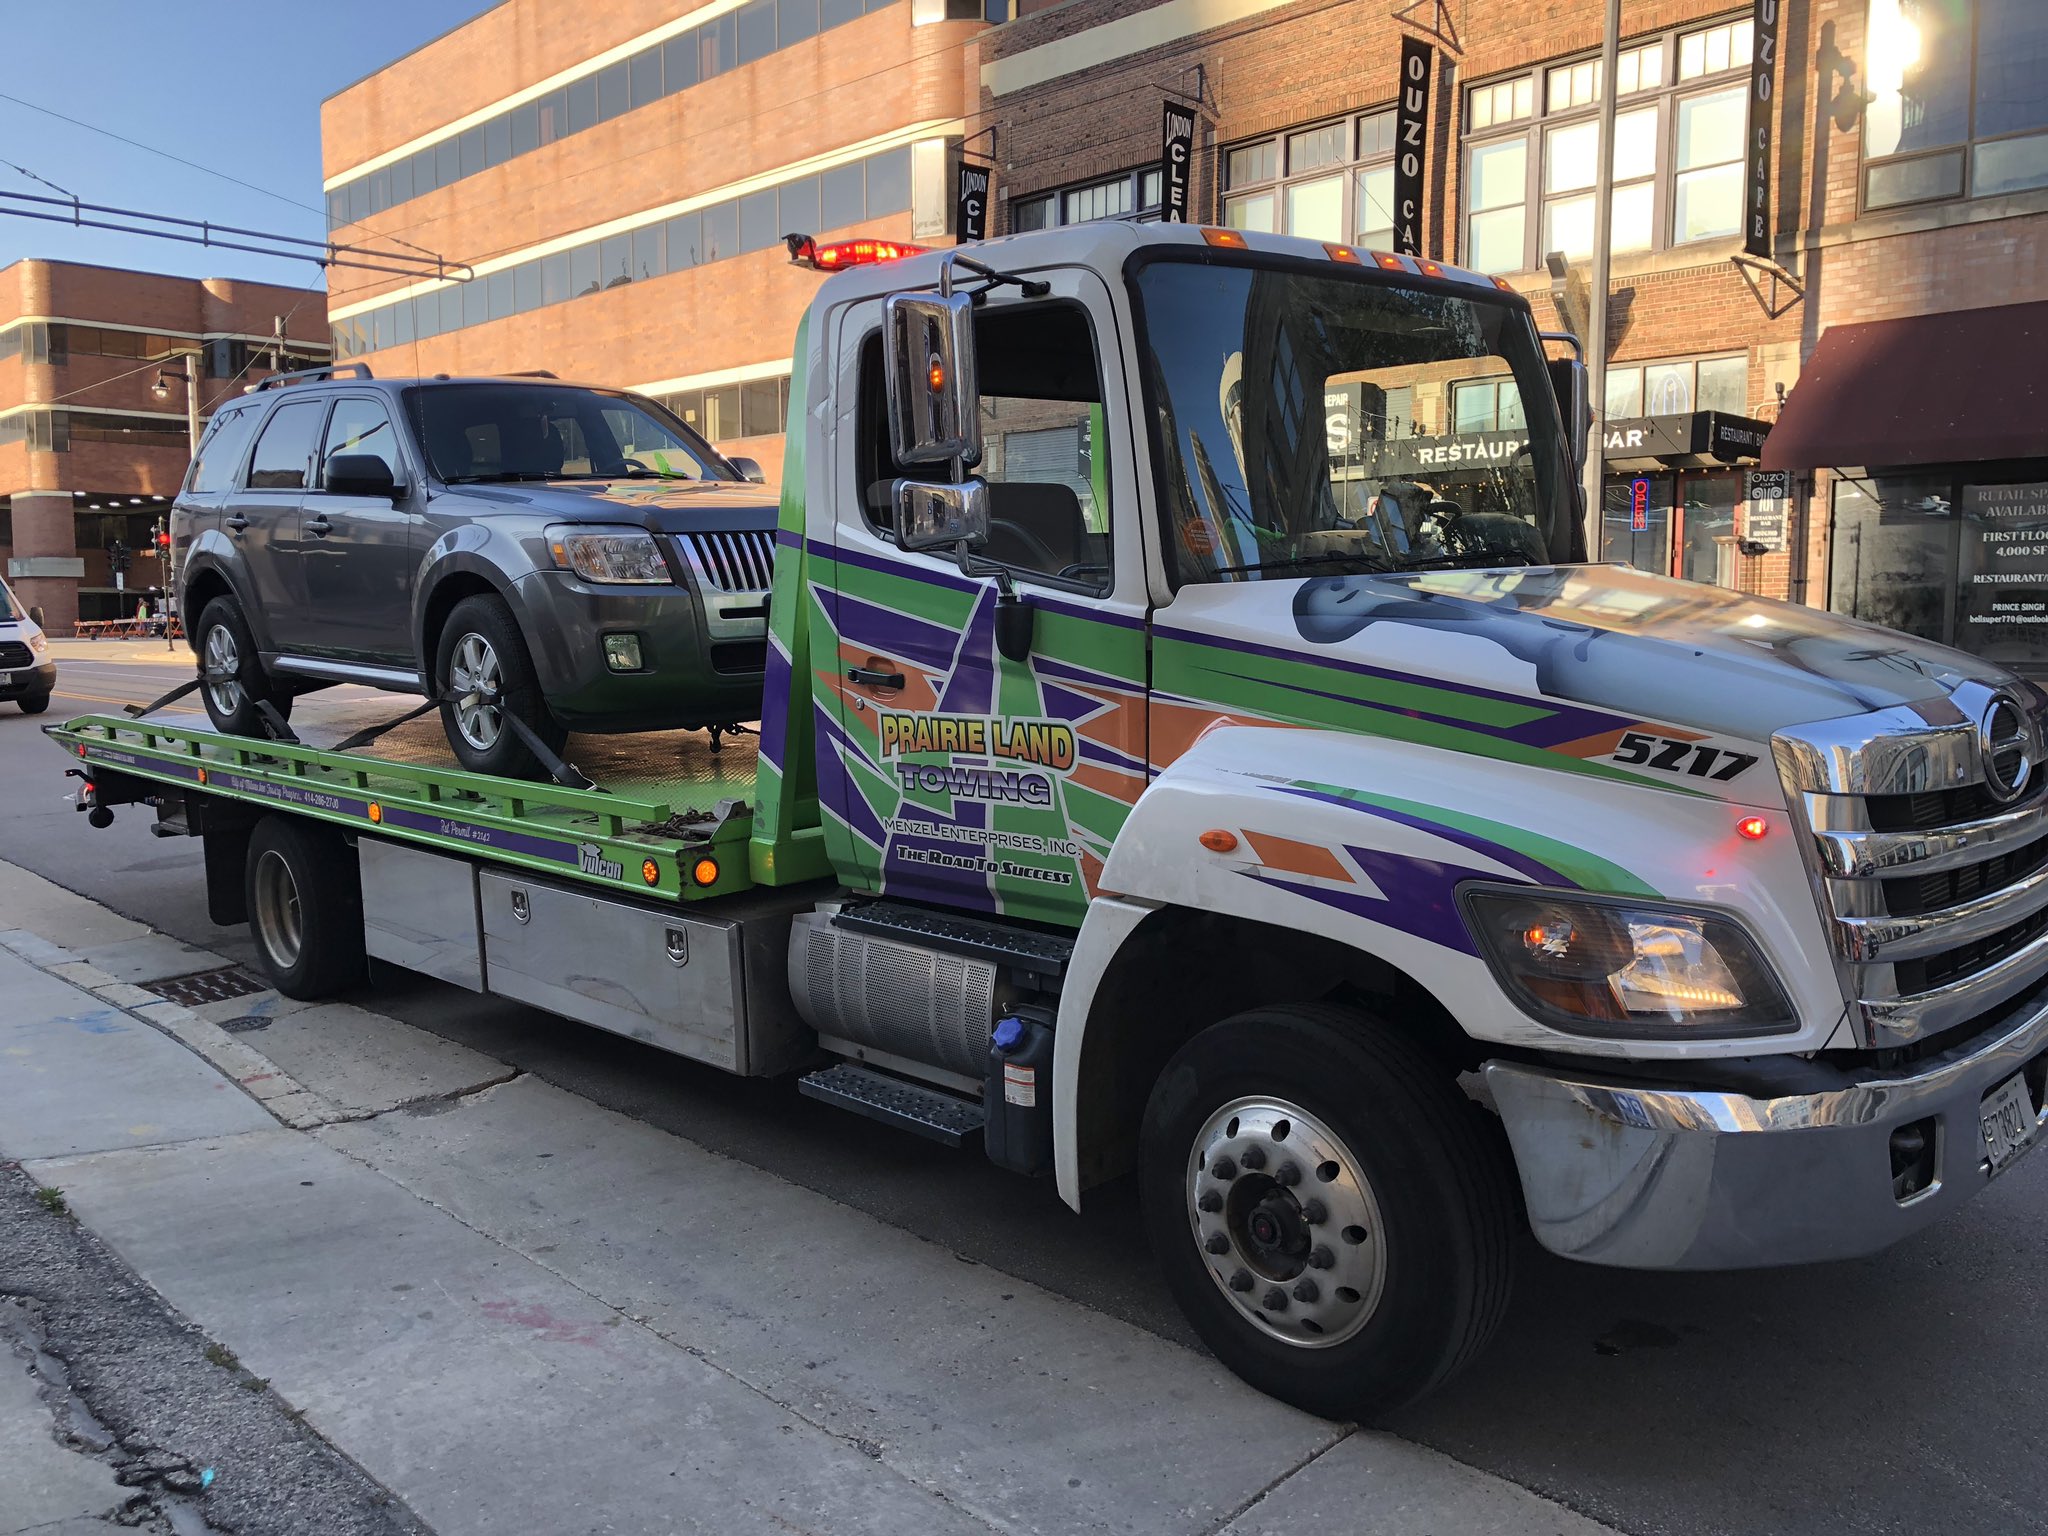 A tow truck hauls away a vehicle on N. Milwaukee St. in 2019. Photo by Jeramey Jannene.